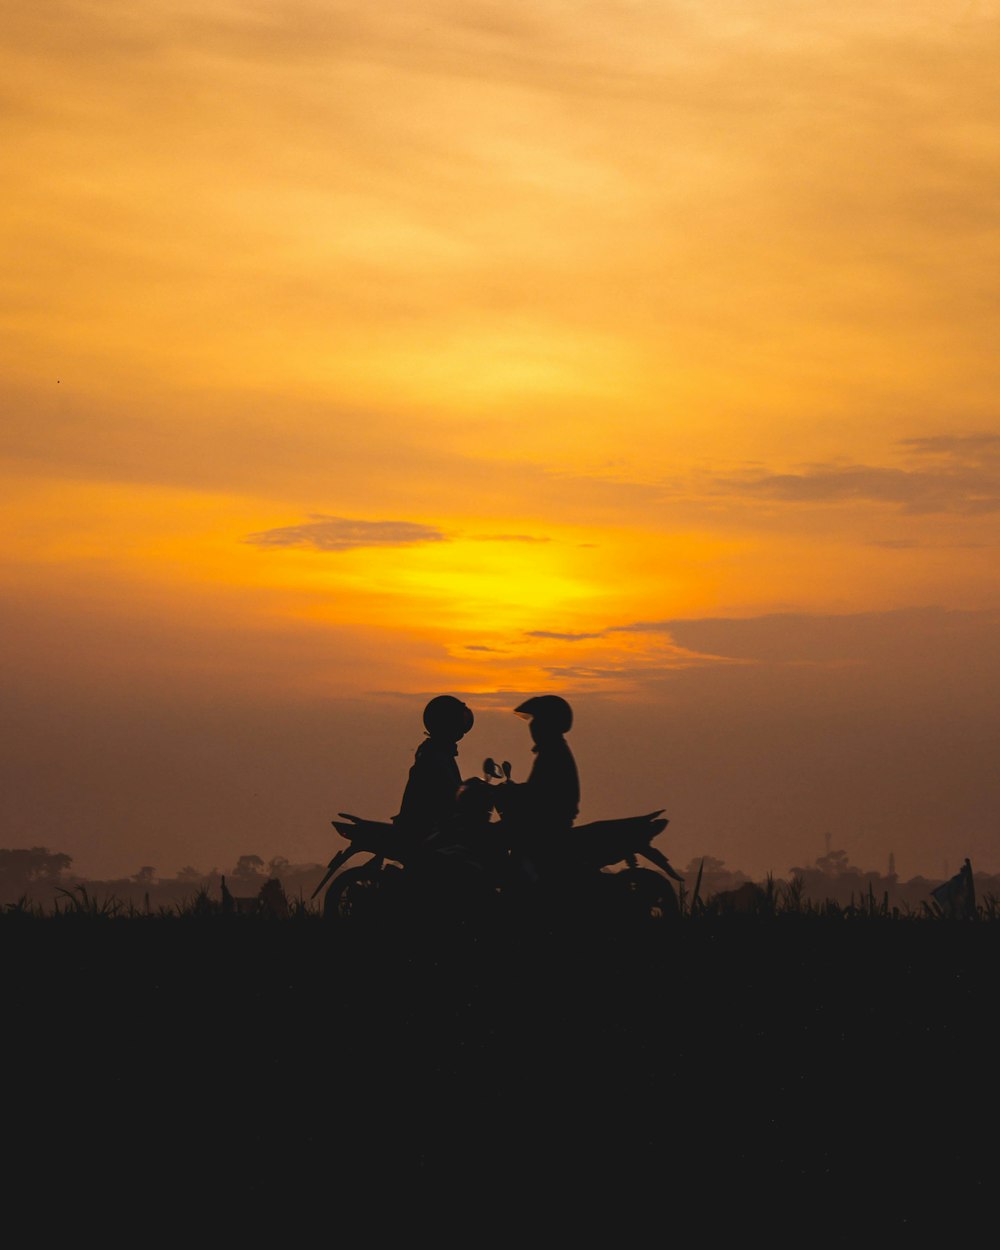 silhouette of man and woman riding motorcycle during sunset